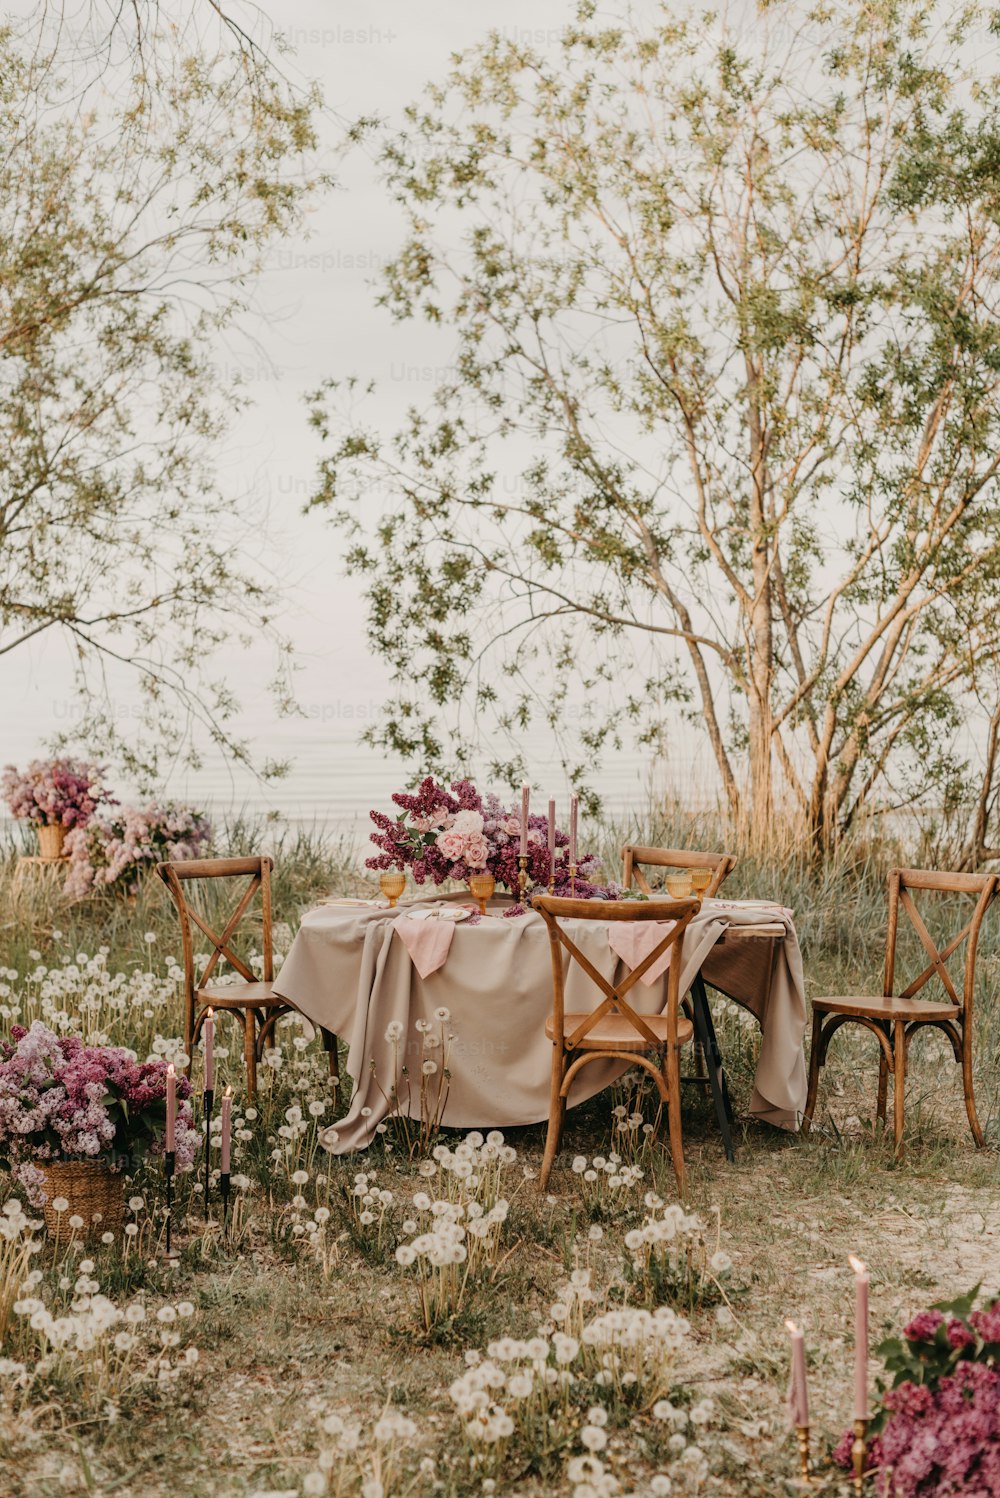 a table with a cloth on it in a field of flowers